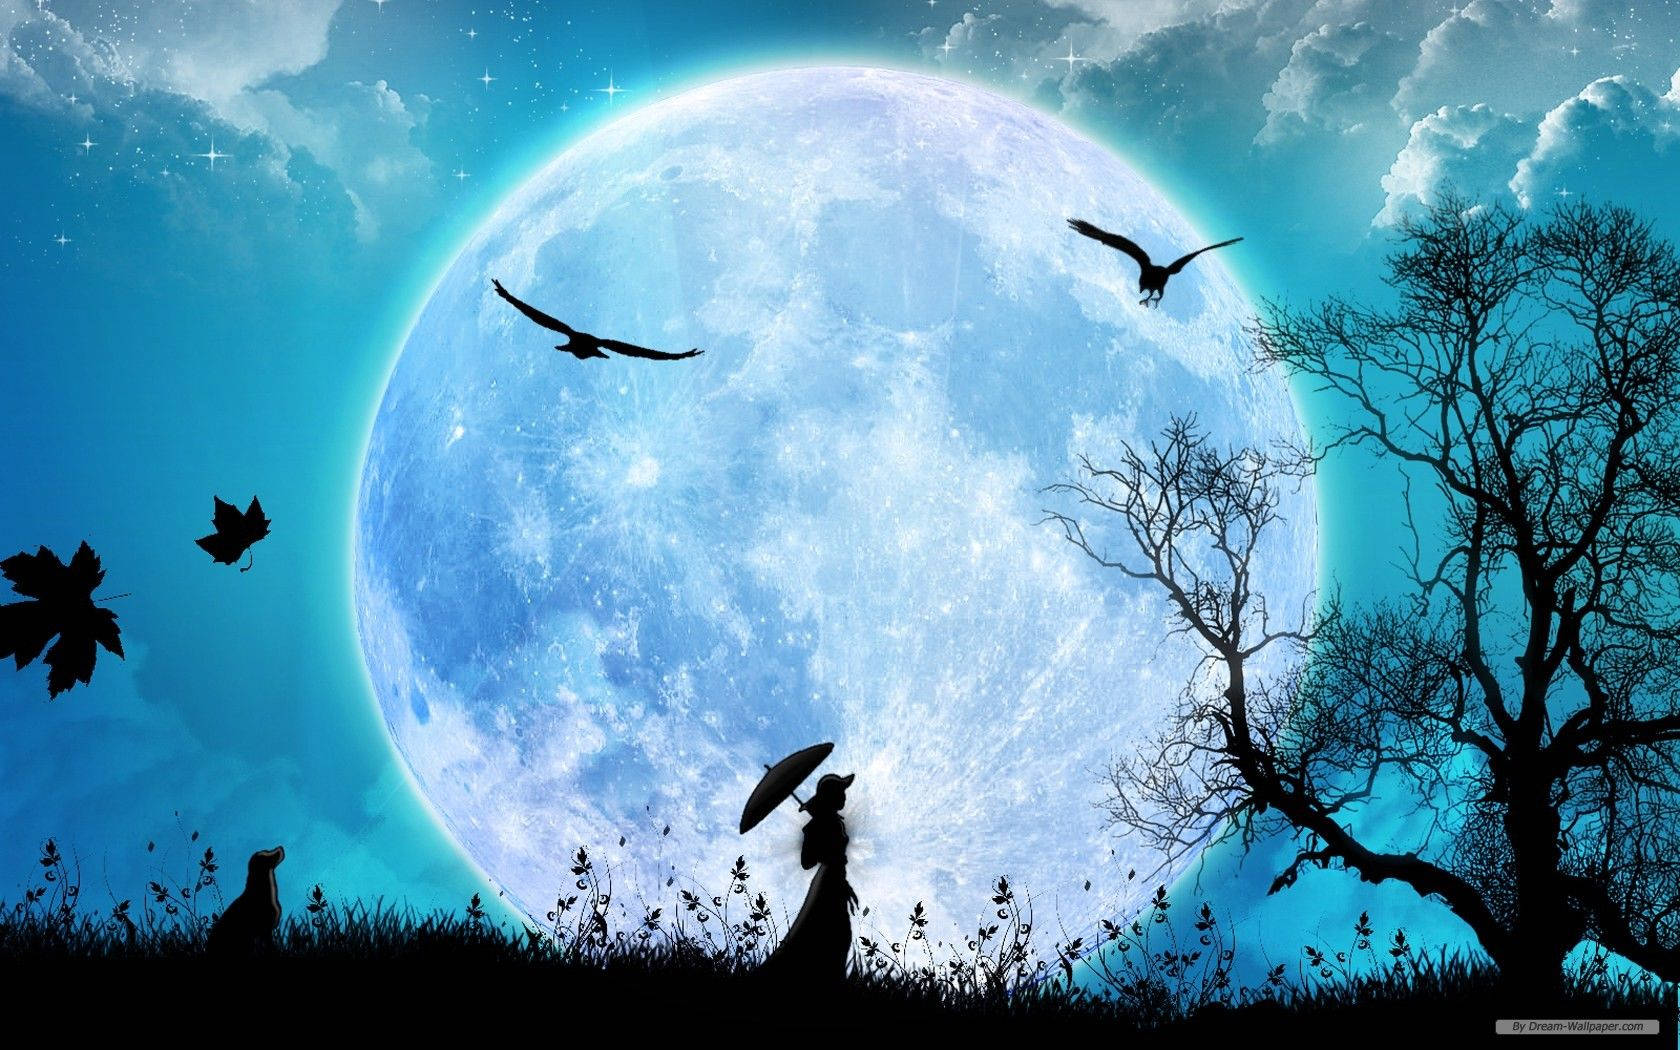 Digital art of a woman with umbrella standing on front of a bright full moon looking at the tree.